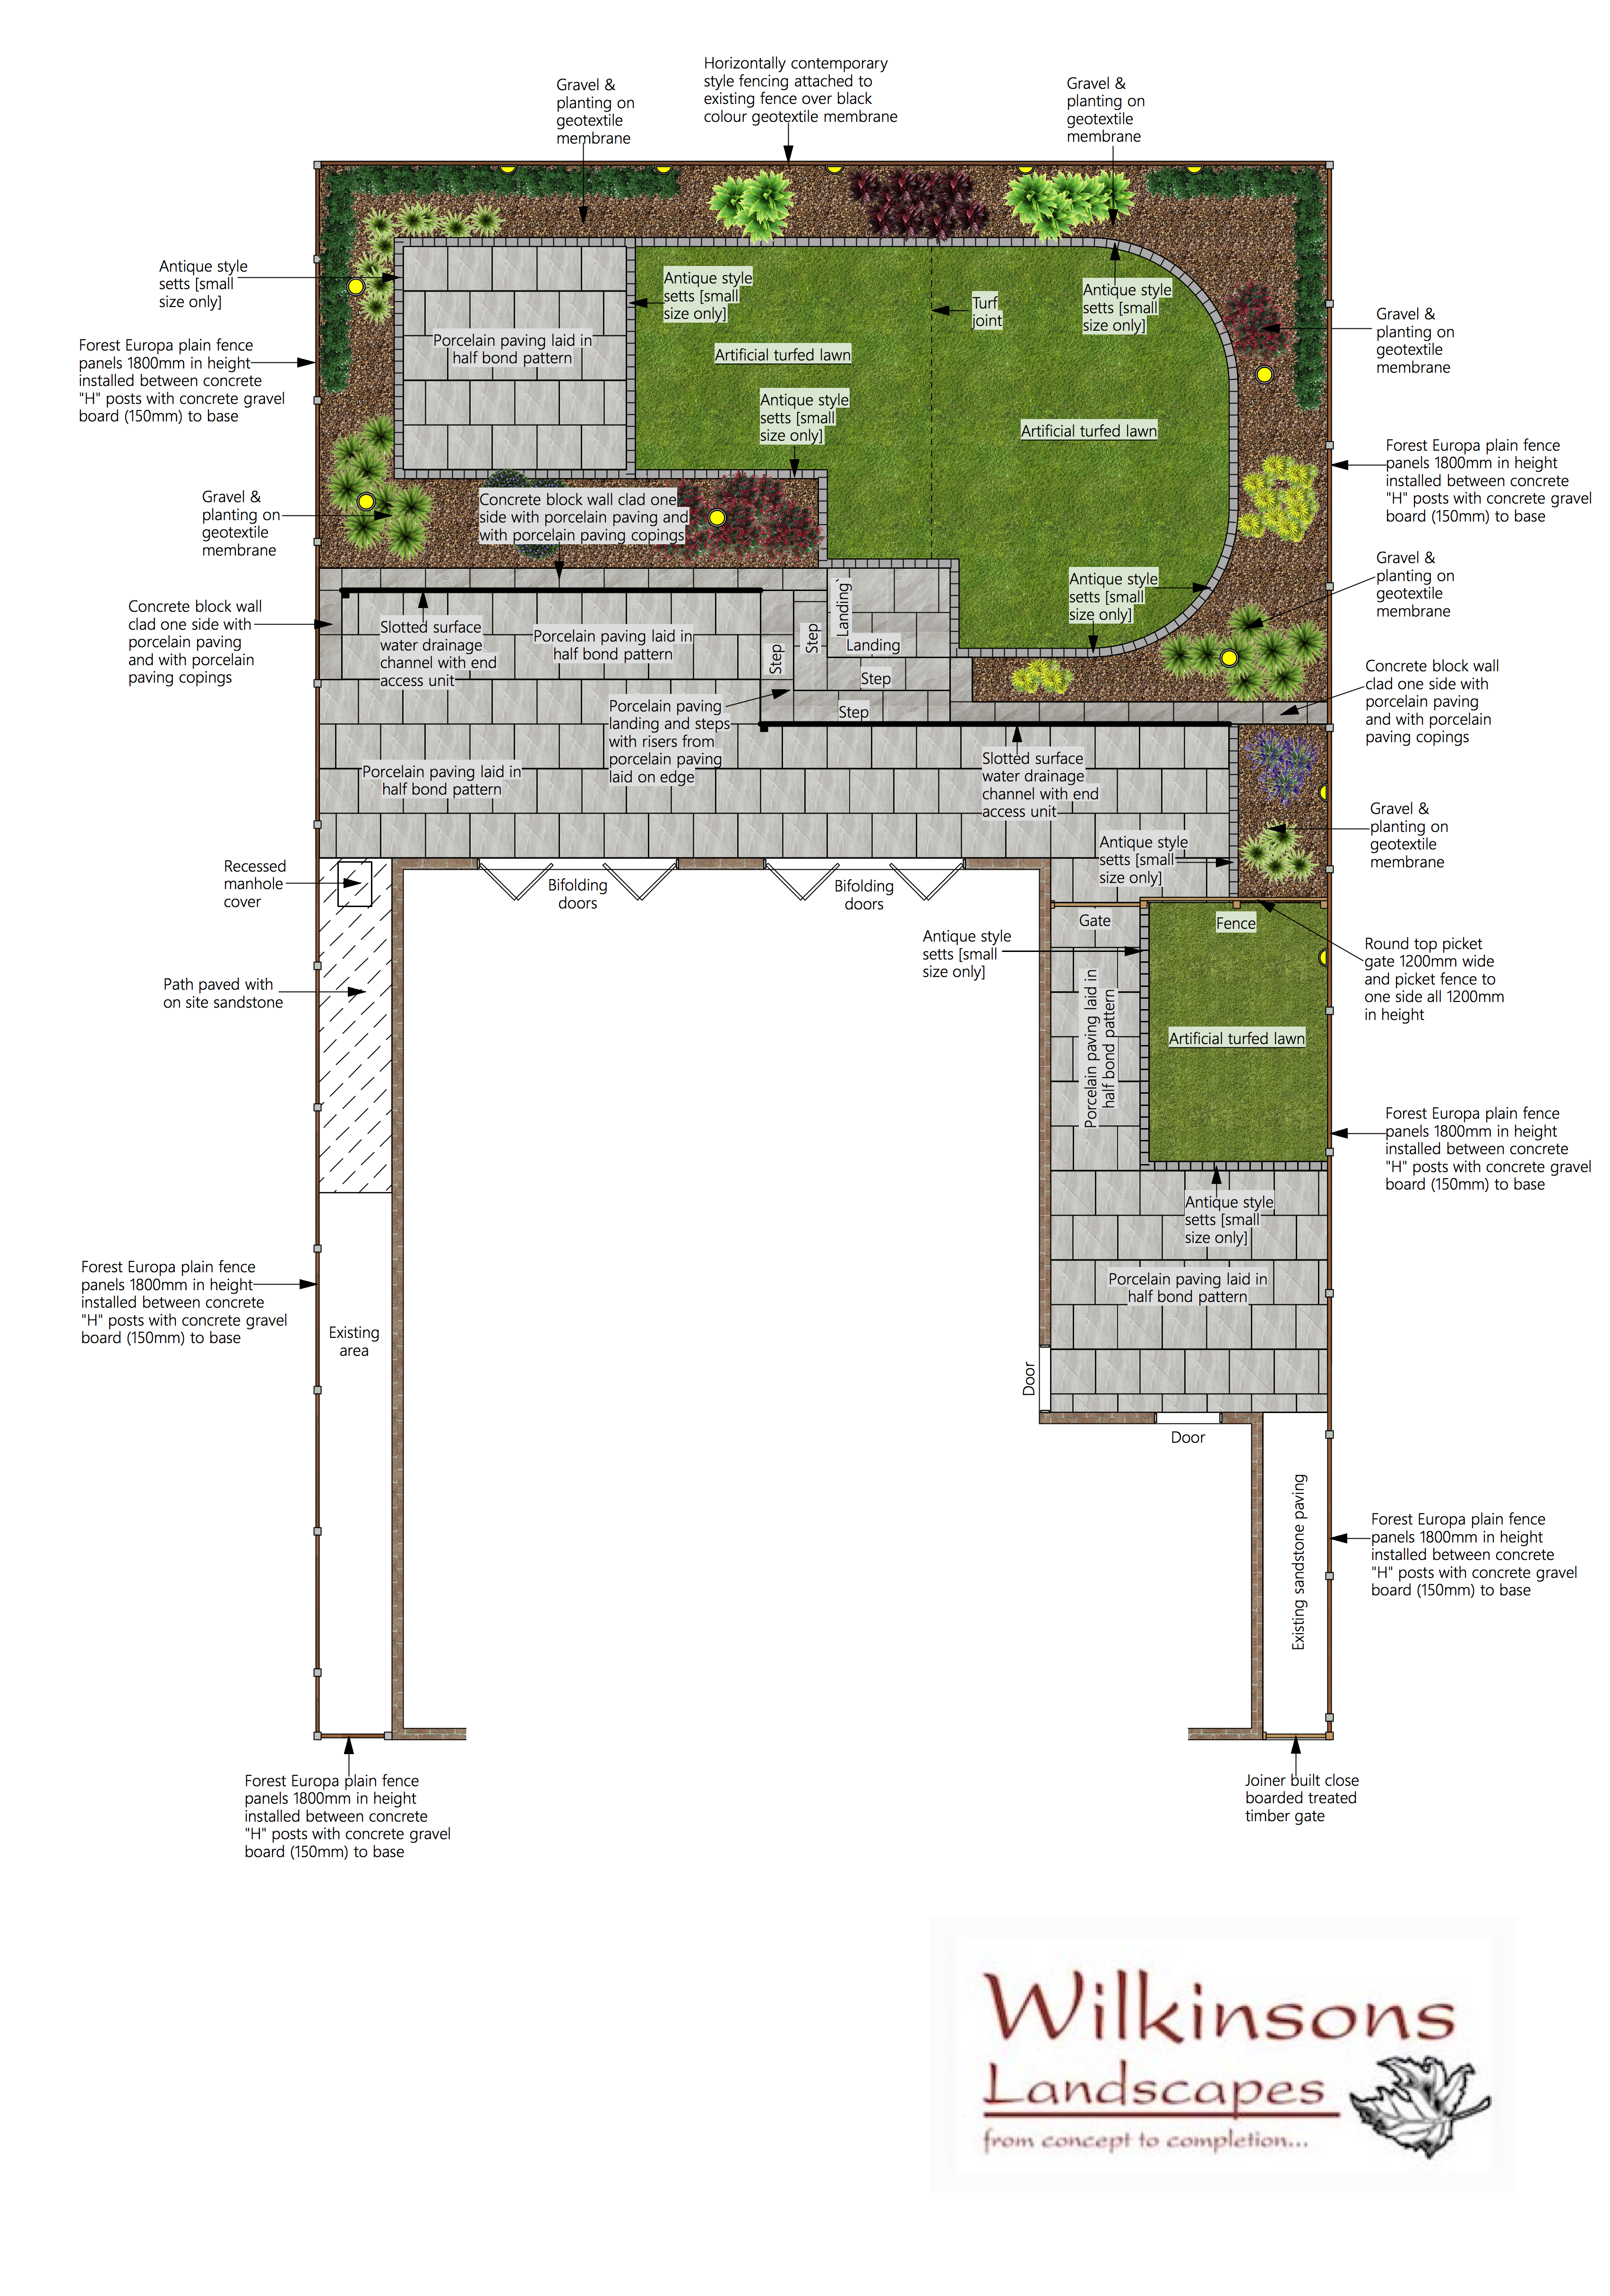 http://Planning%20view%20of%20Stokesley%20garden%20projects